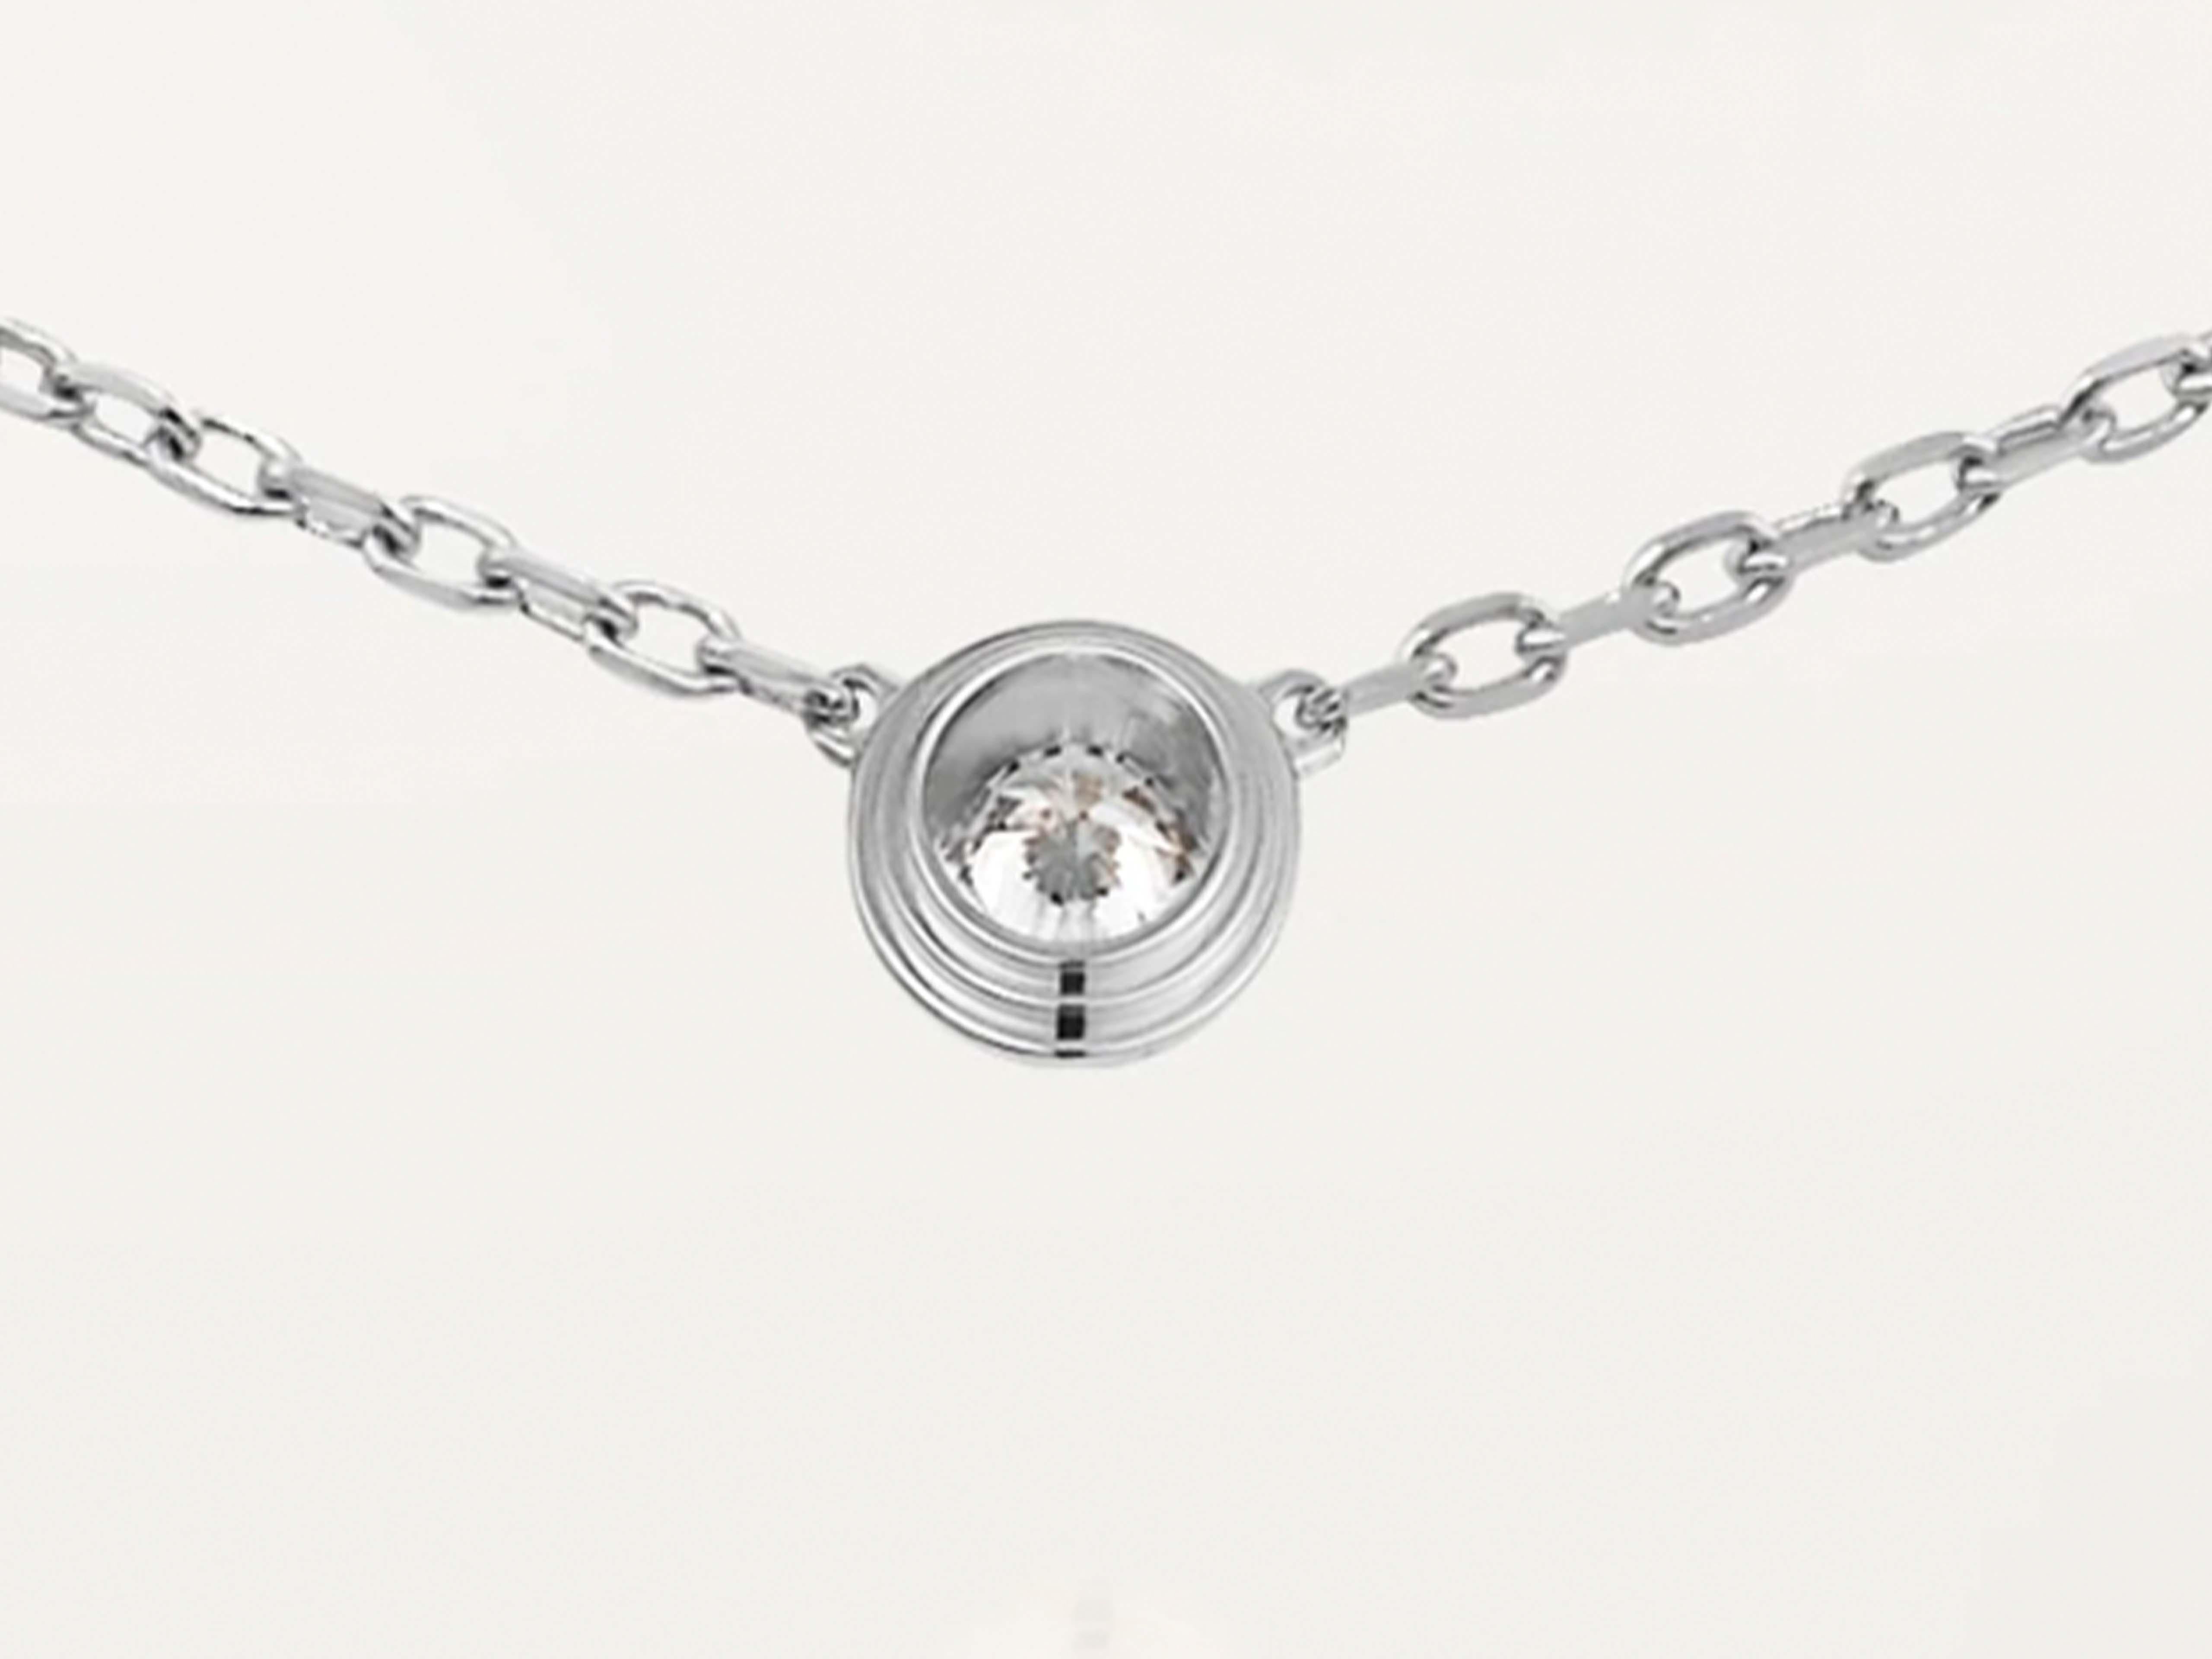 Cartier D'amour Diamond Necklace in 18k White Gold 2